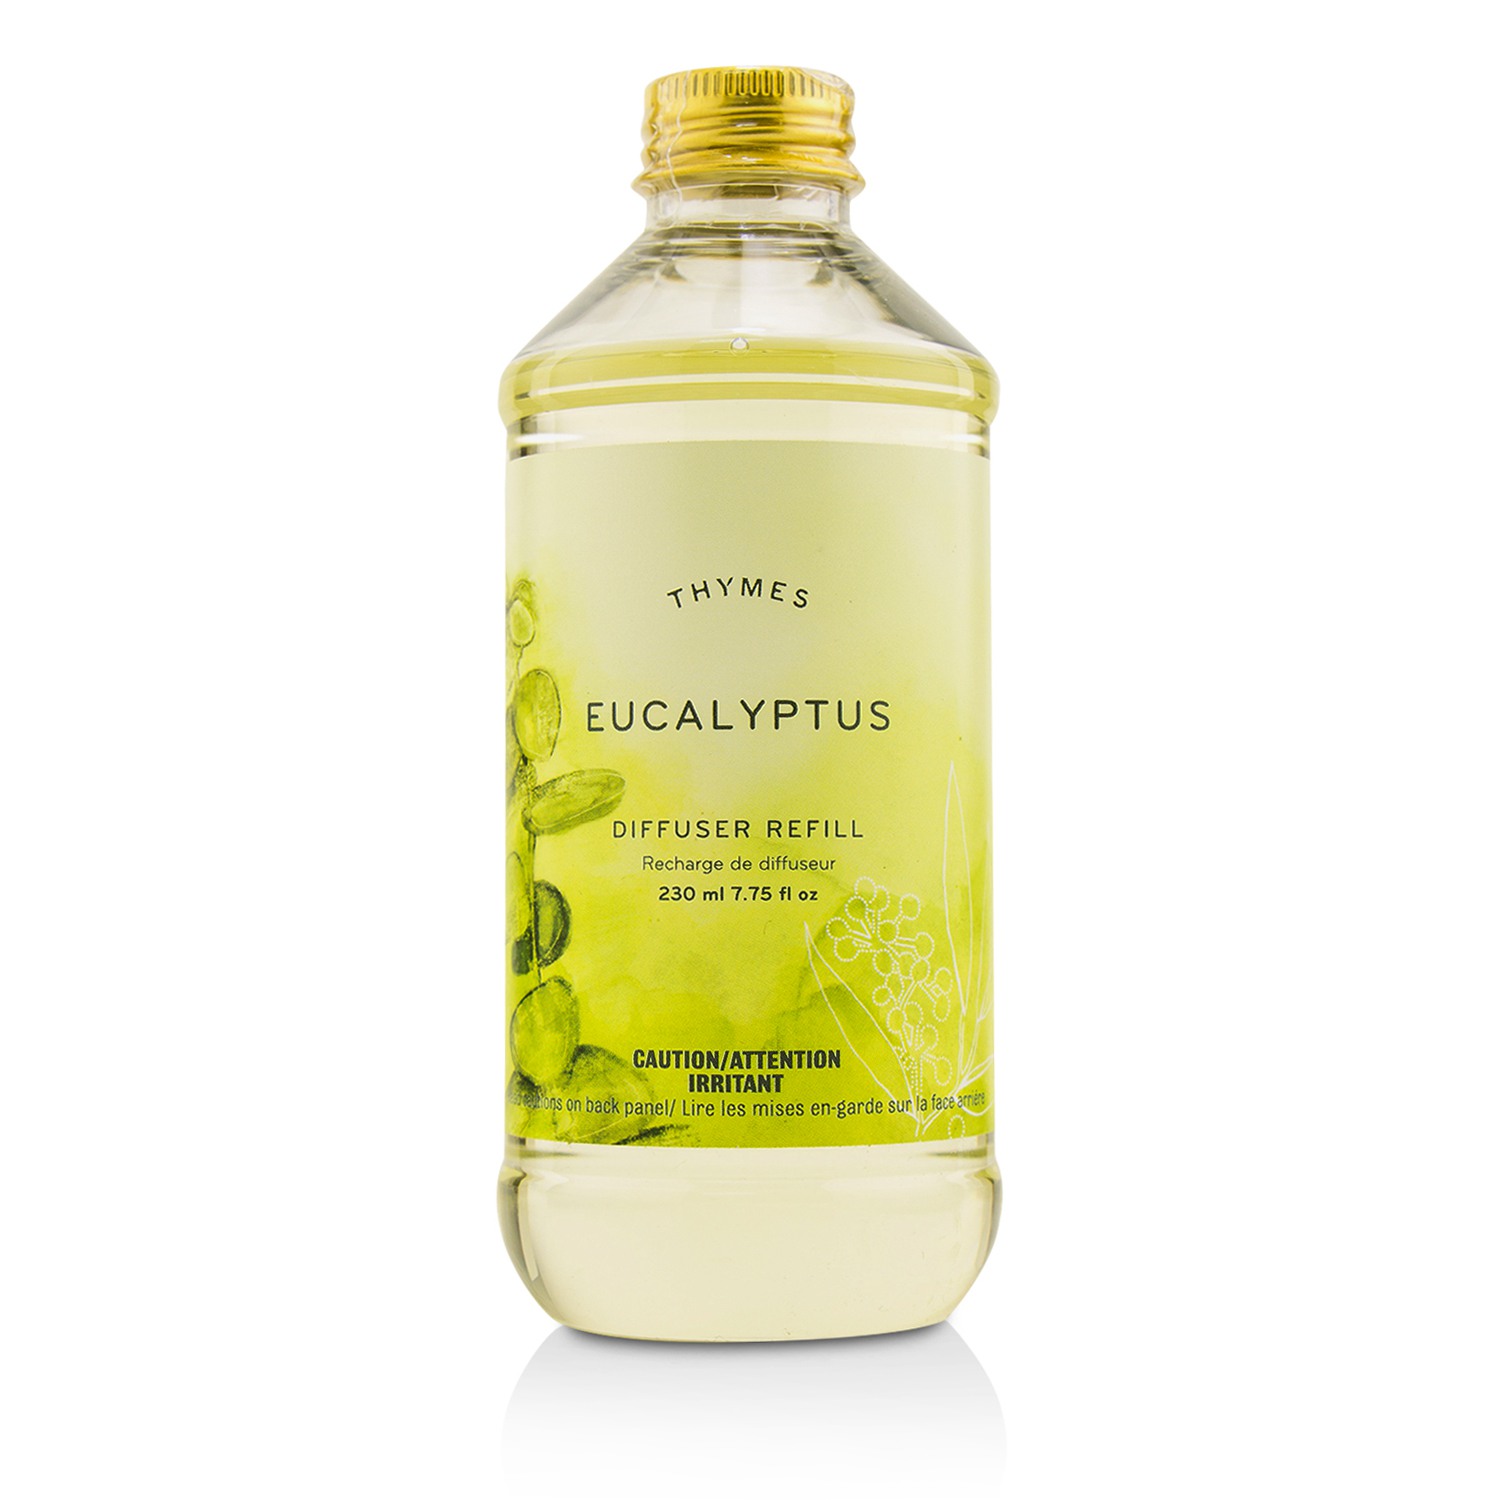 Aromatic Diffuser Refill - Eucalyptus Thymes Image